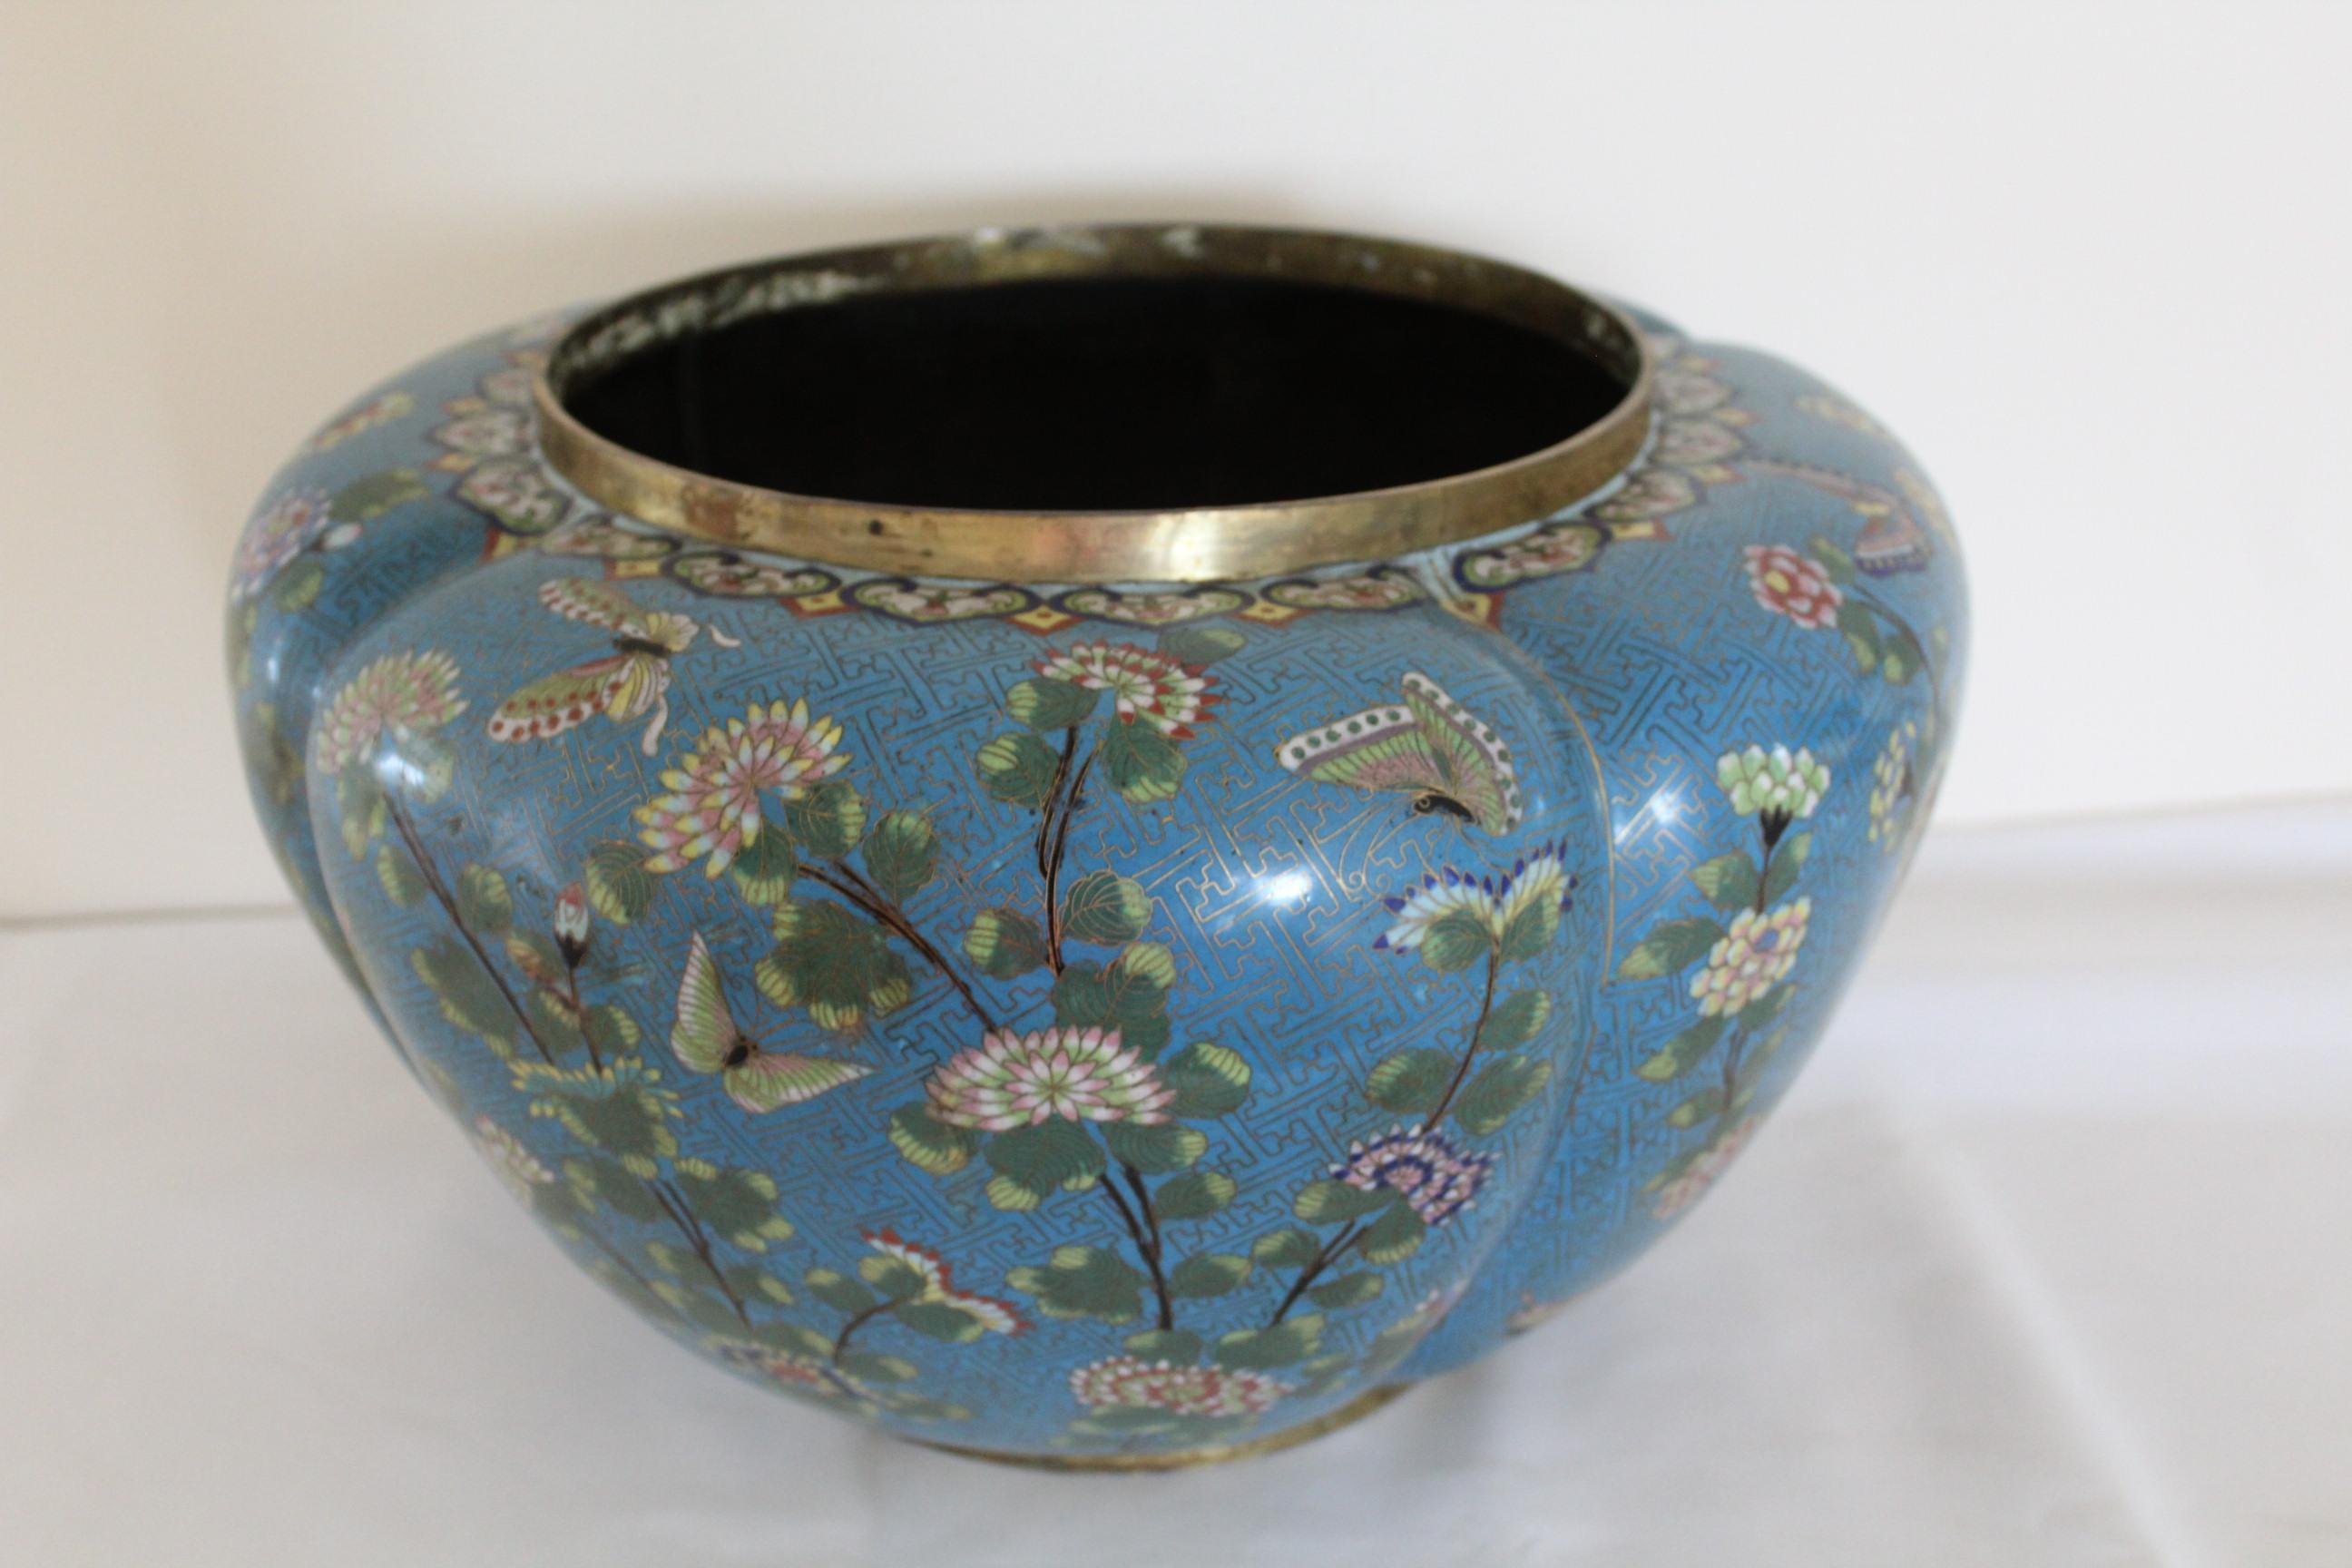 A large Chainese blue Cloisonne jardinière or planter depicting Butterfies in a garden of flowers, Chrysanthemum and Cherry Blossoms with their stems and leaves. The top and bottom have a gilded band around the frieze of dark blue.